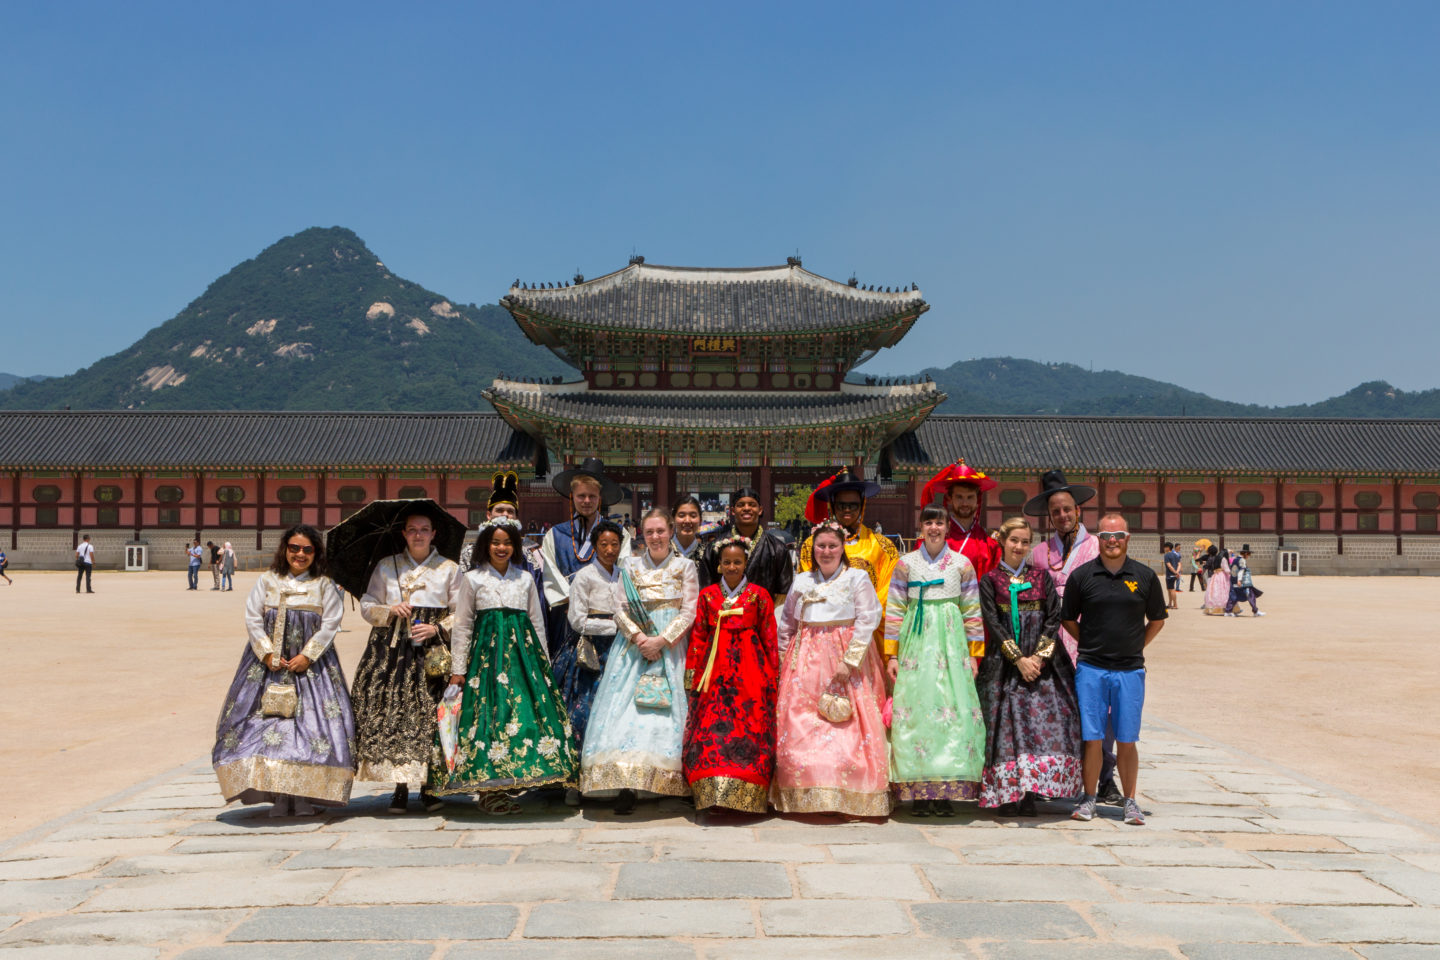 Greenheart Traveler’s Instagrams from our TEFL Course in South Korea